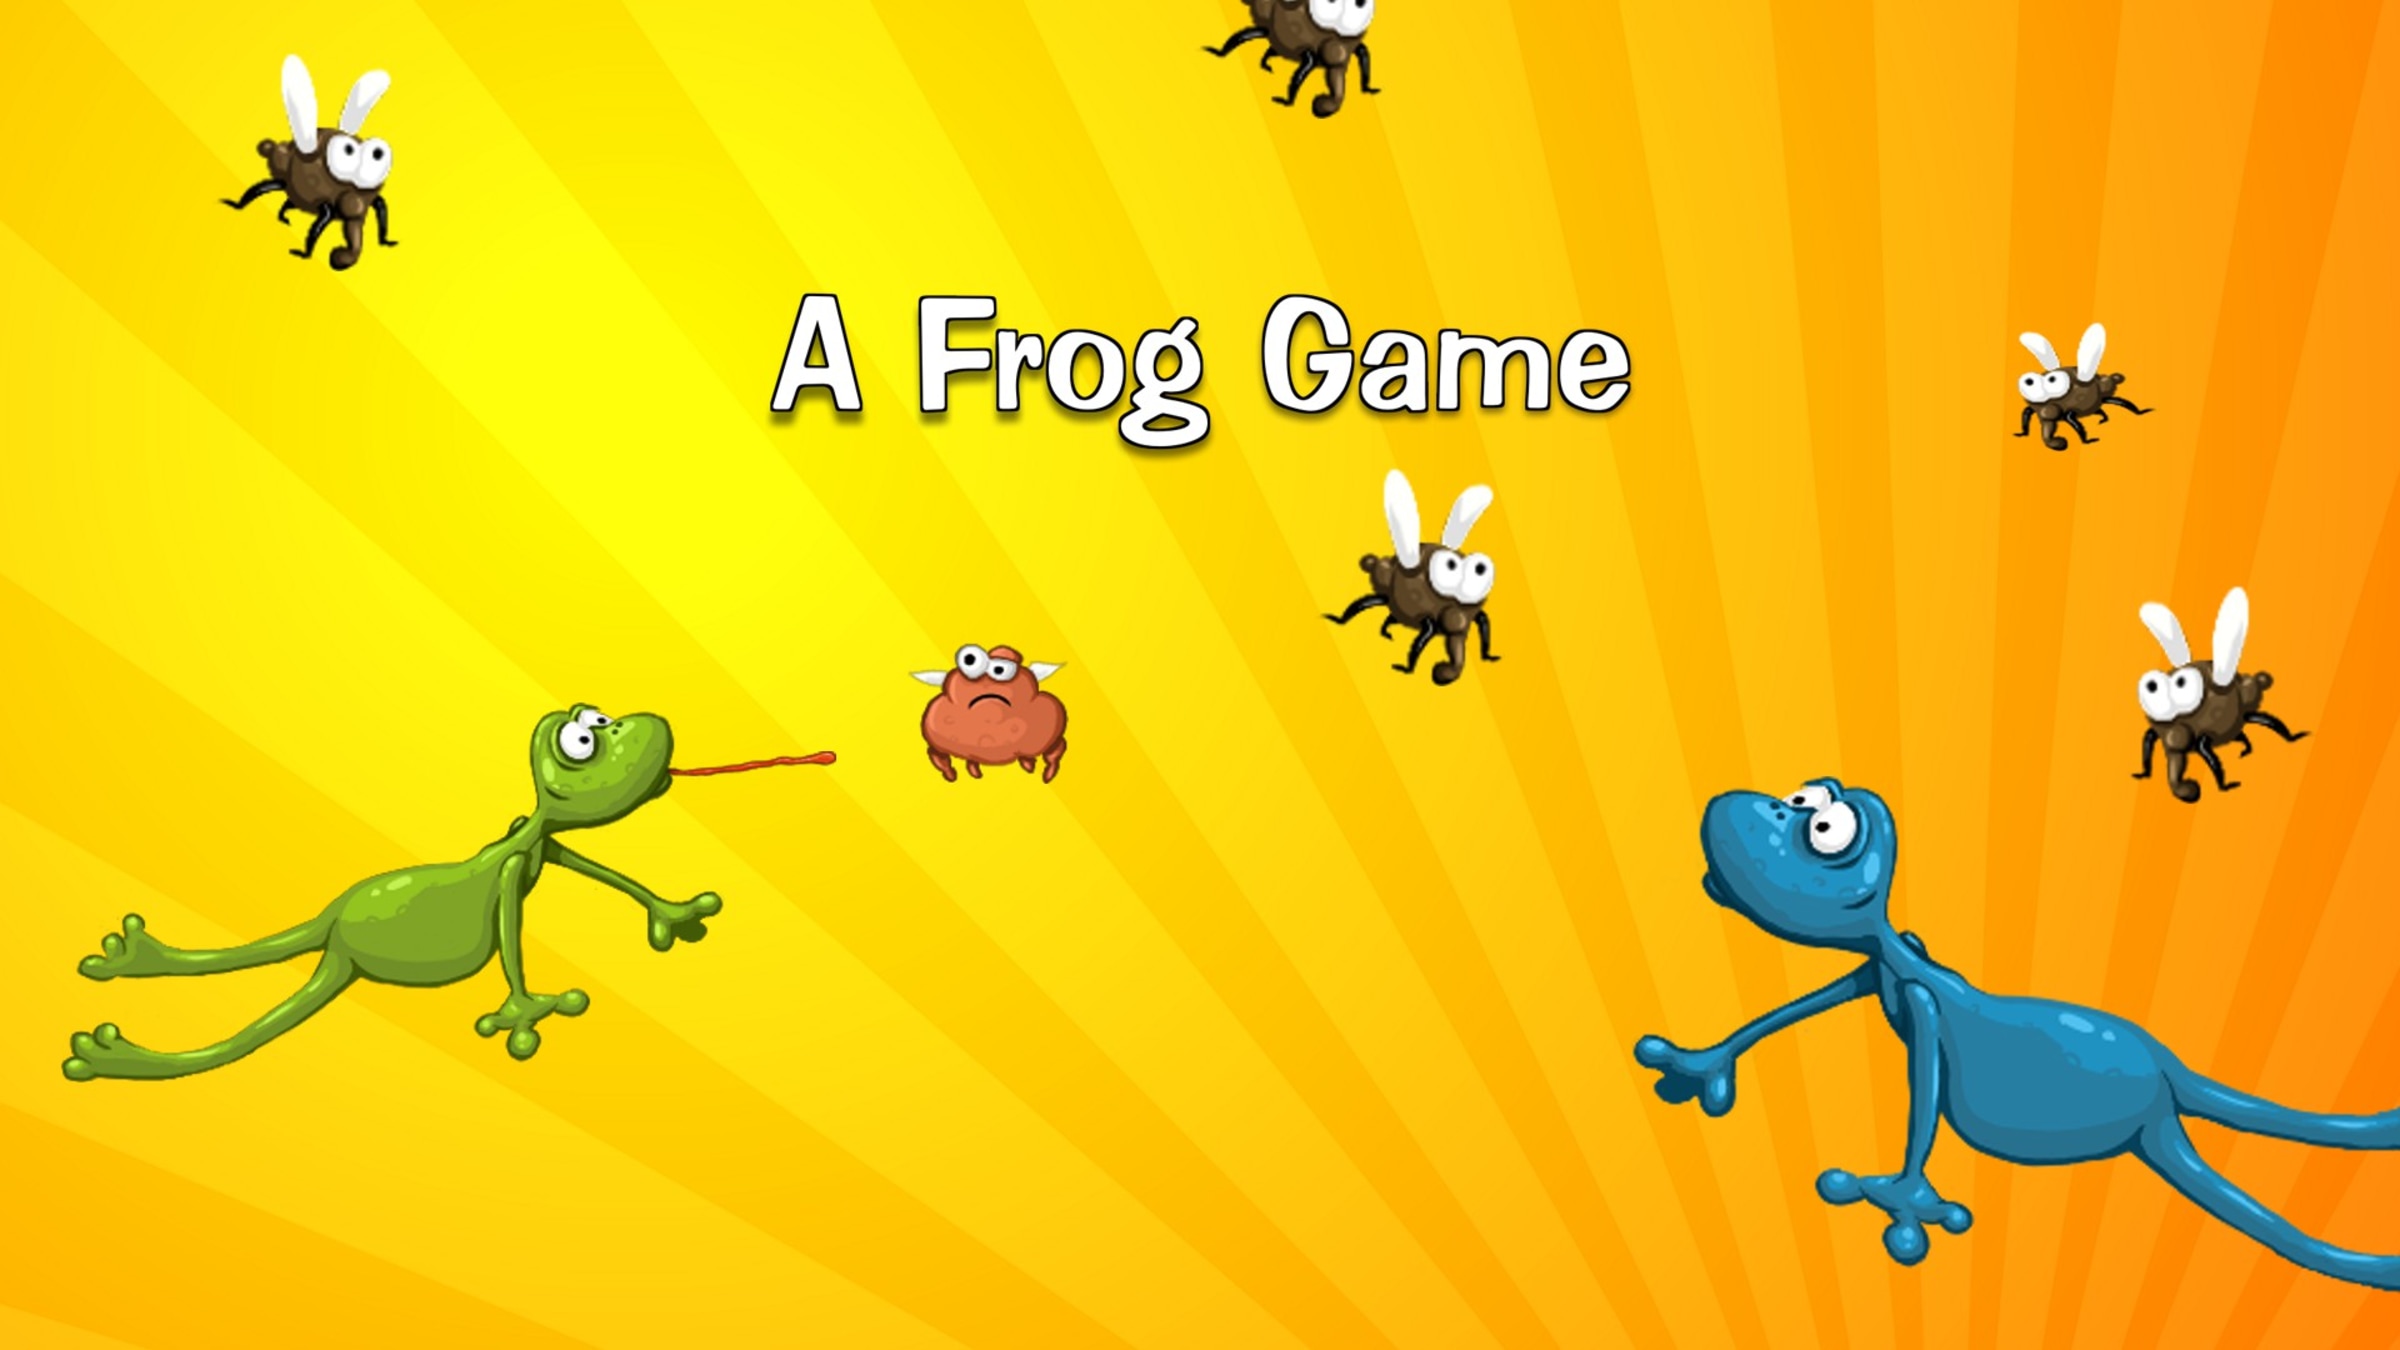 They like to jump. Frog игра. Fly for game Frog. Игра Джампер Фрог. Game Frog 1999.